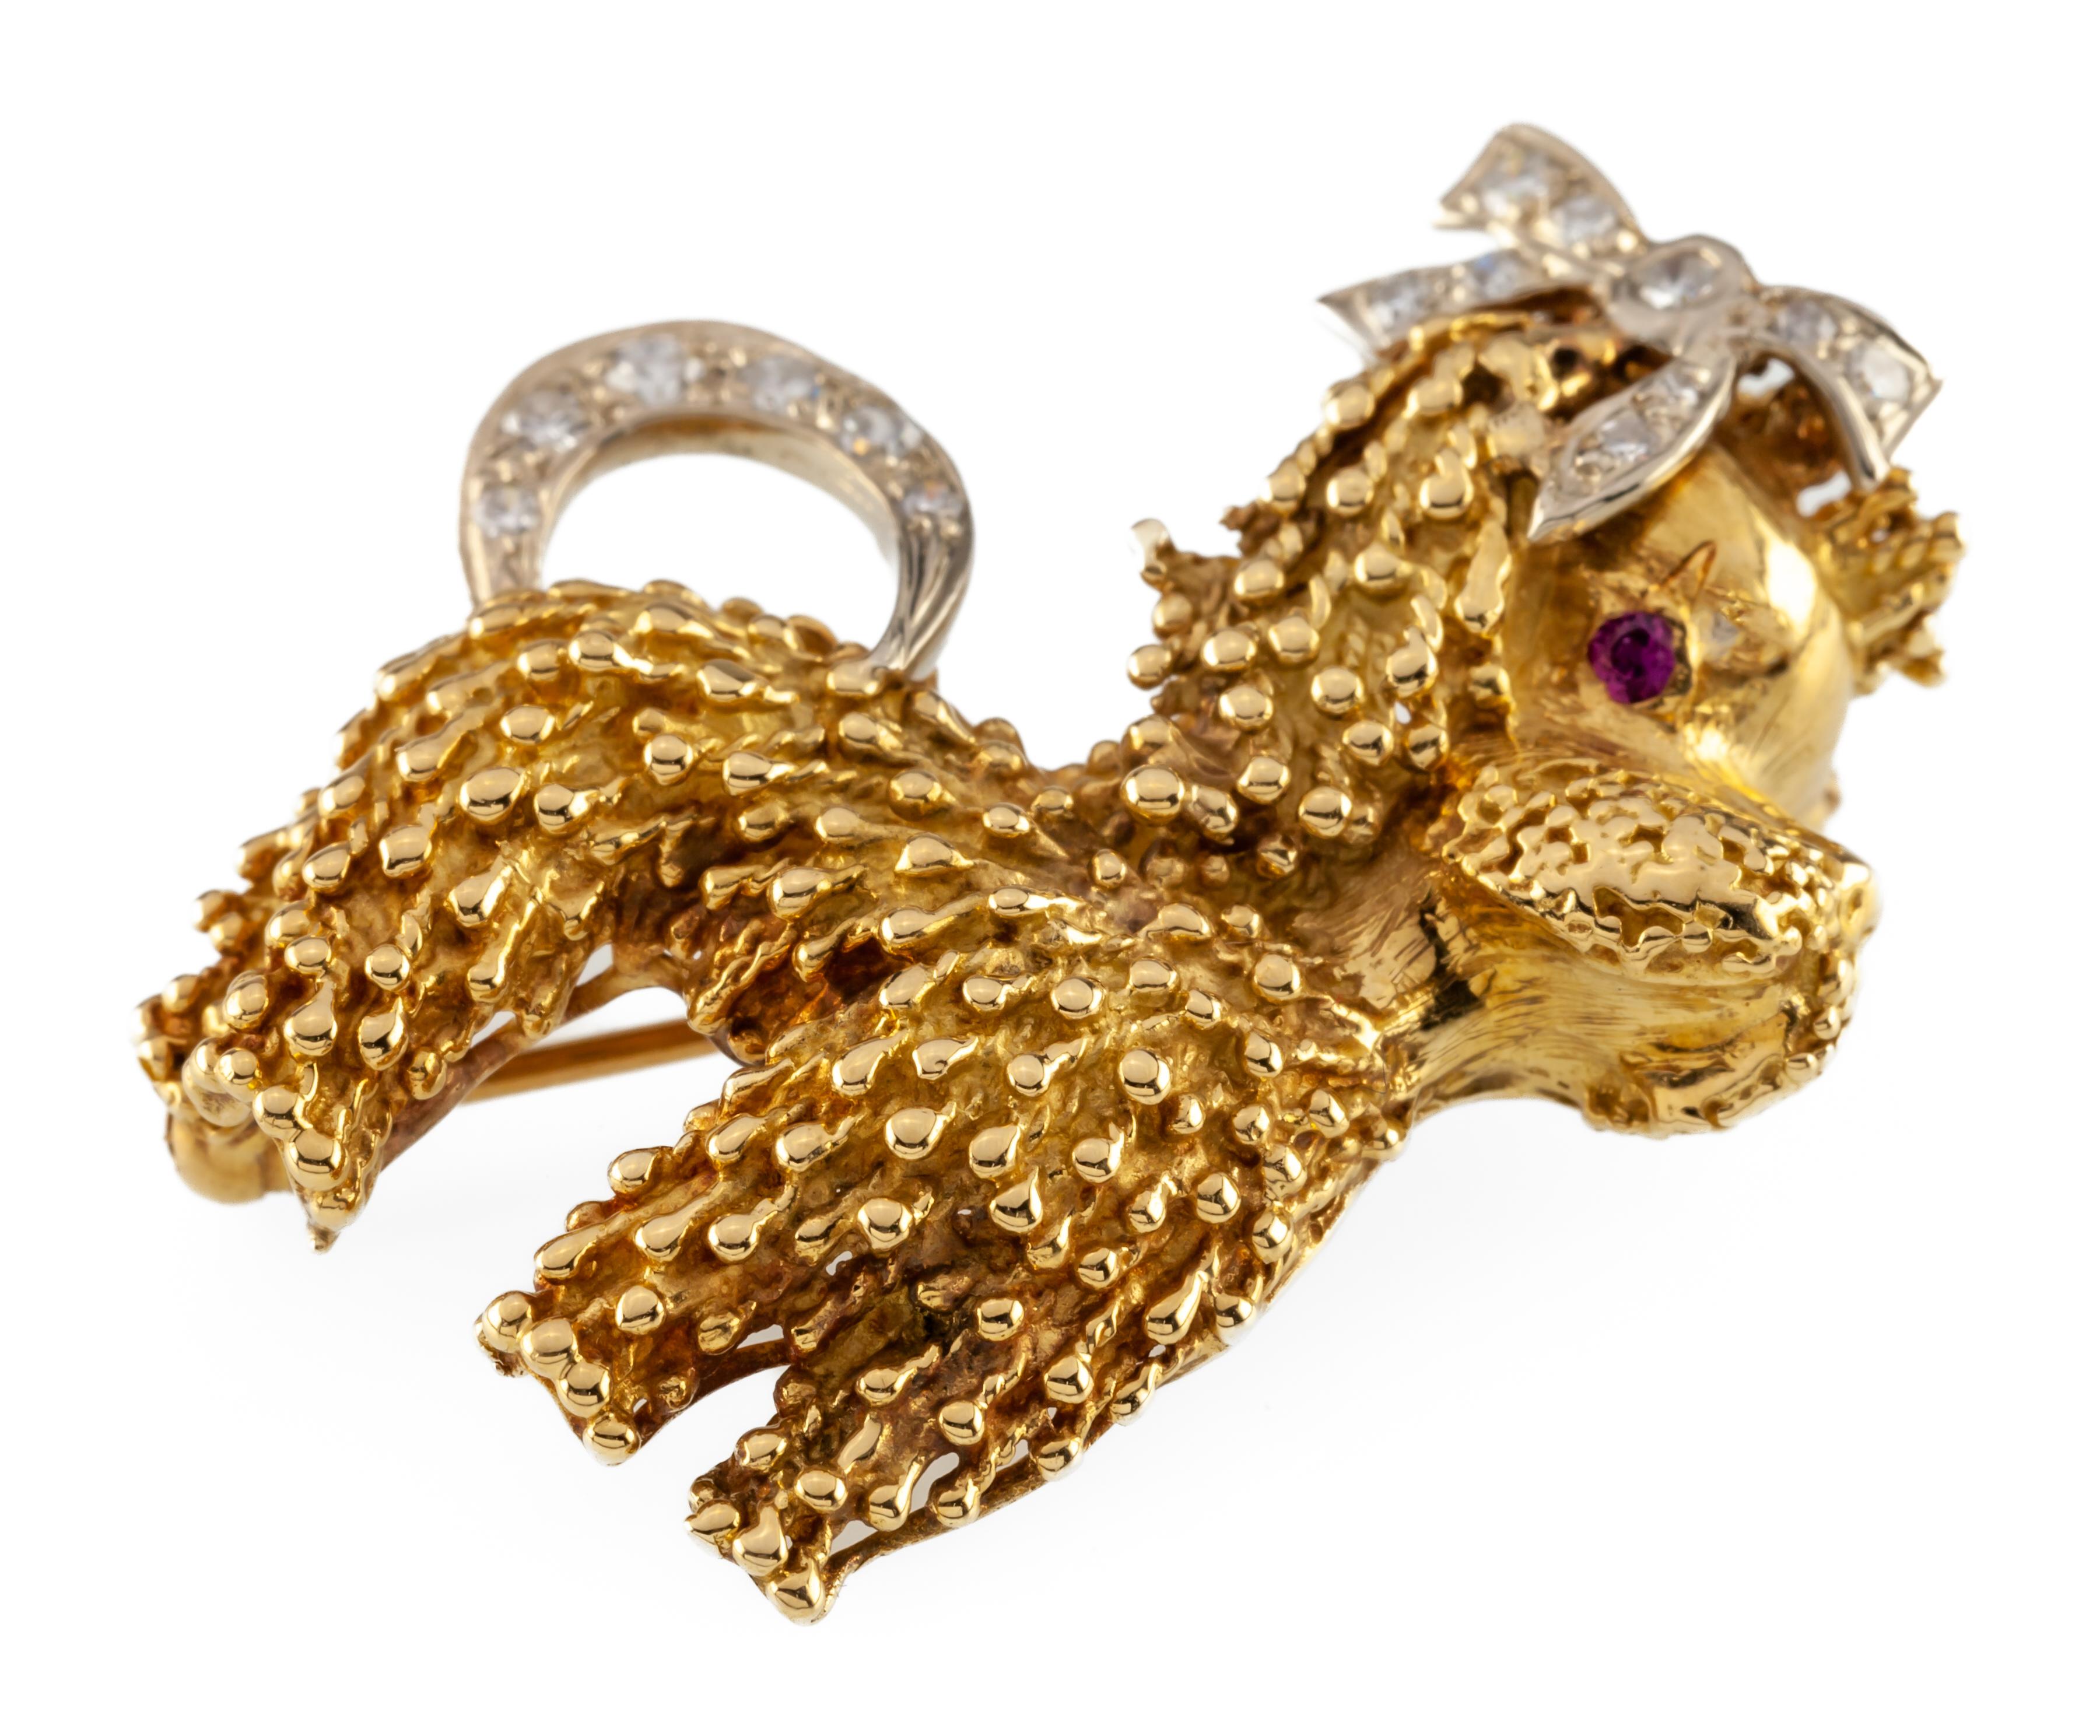 Women's 18k Yellow Gold Poodle Brooch Featuring Diamond & Ruby Accents with Certificate For Sale